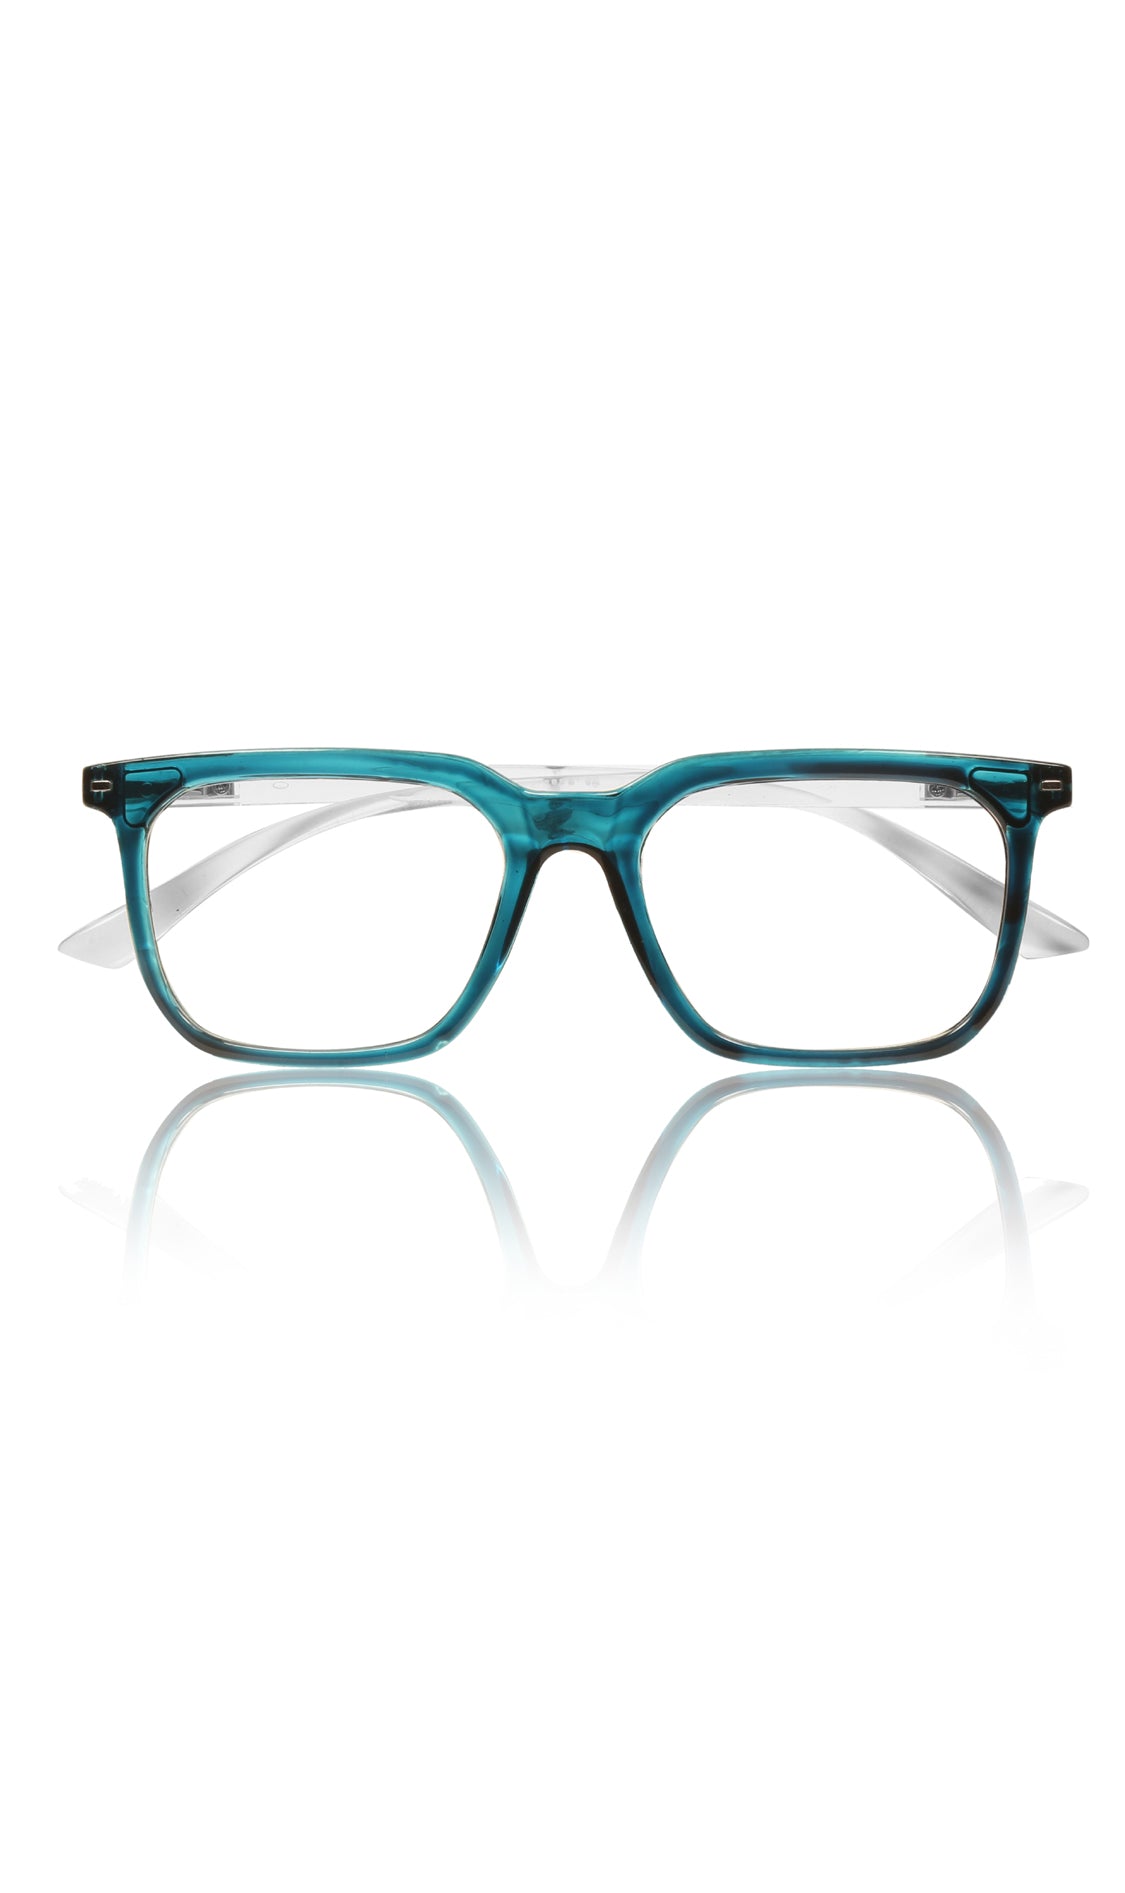 Jodykoes® Colour Frame Series: Stylish Square Spectacle Frames with Blue Ray Protection and Anti-Glare Glasses for Men and Women (Turquoise Blue) - Jodykoes ®